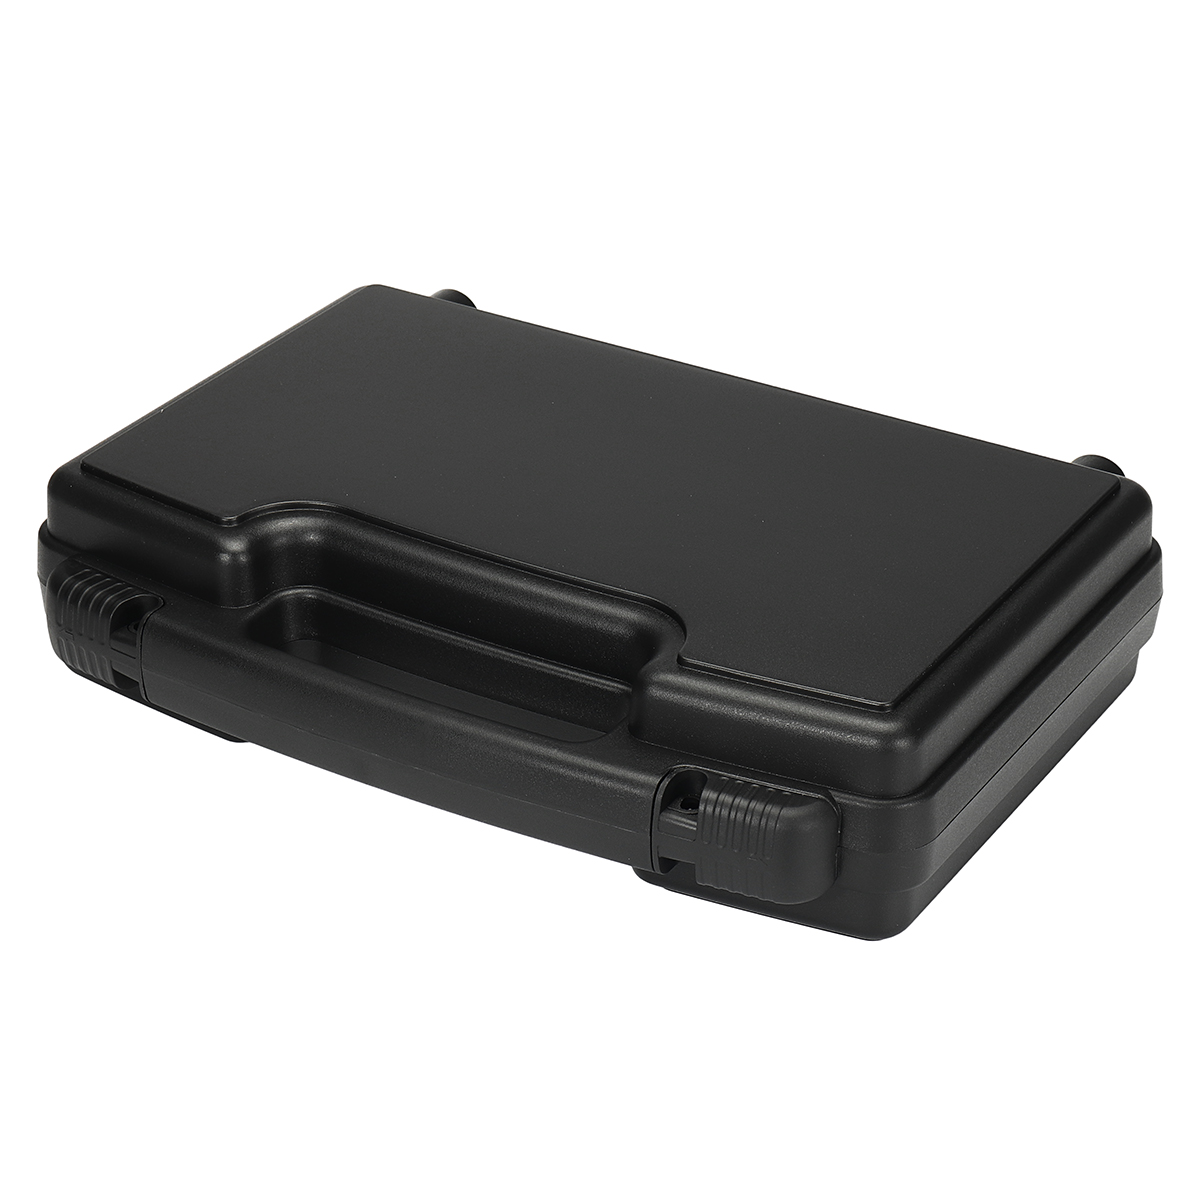 Waterproof-Hard-Carry-Tool-Case-Bag-Storage-Box-Camera-Photography-with-Foam-1791082-7